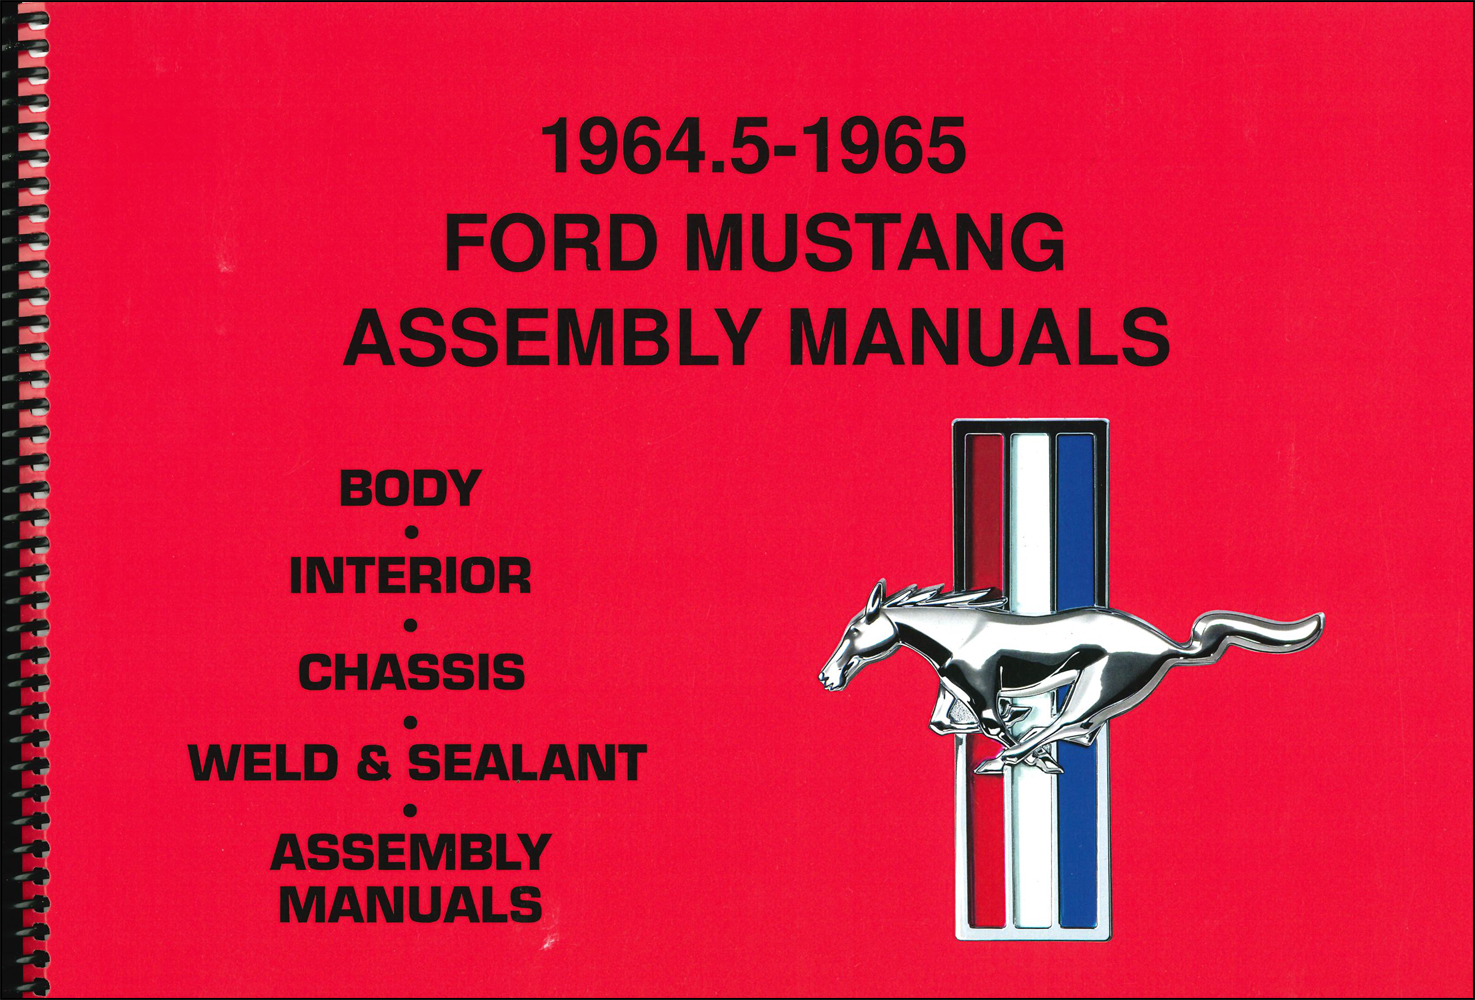 1964.5-1965 Ford Mustang Assembly Manual Reprint 4 Books in 1